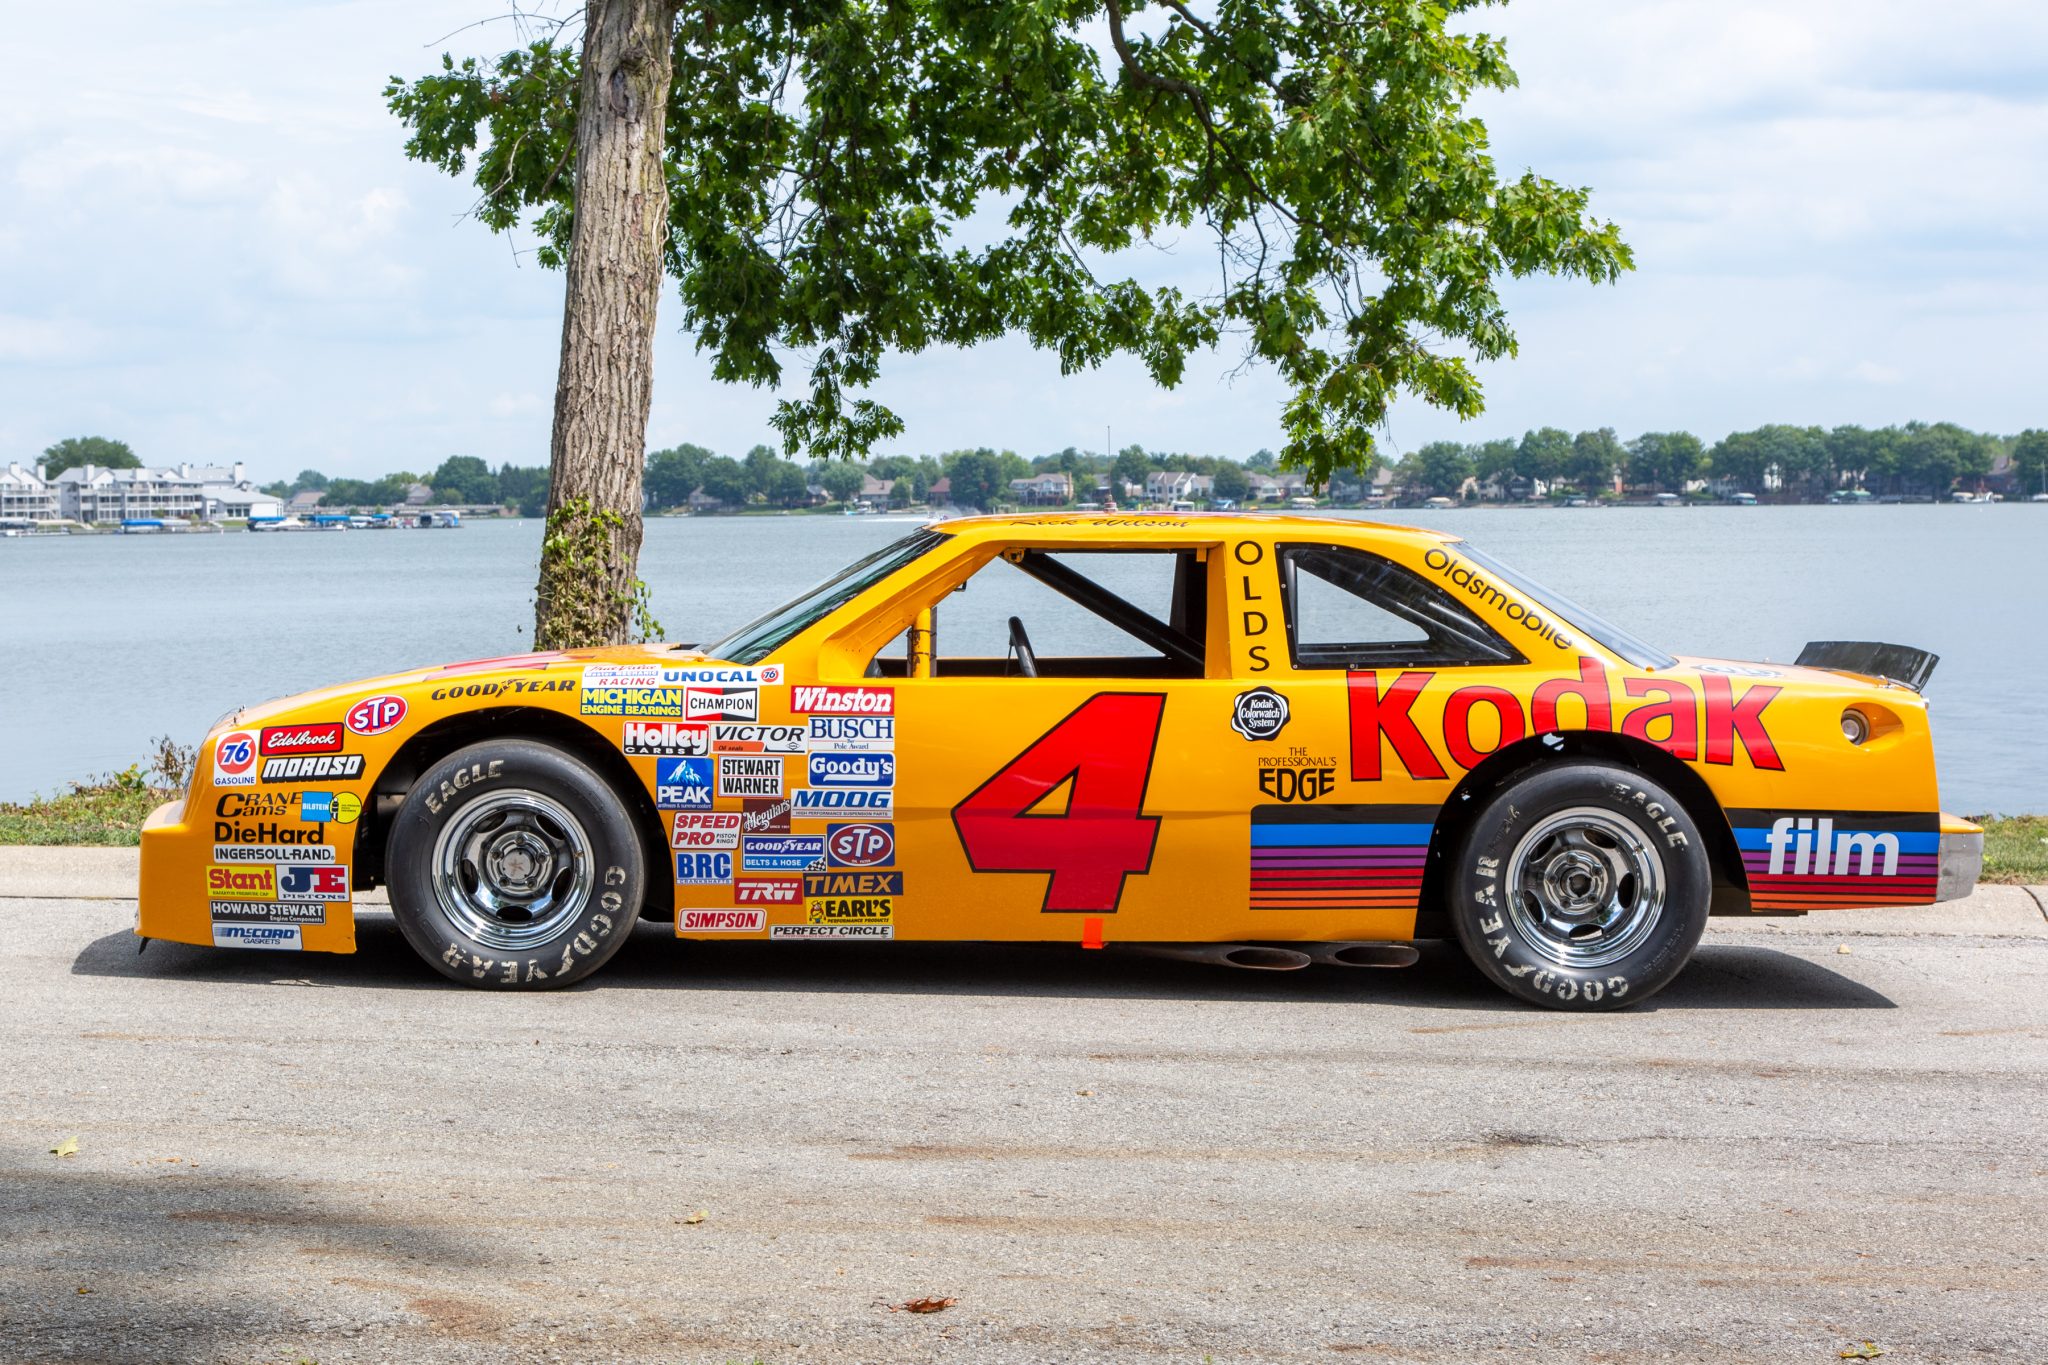 Here’s your chance to own a 1988 Kodak NASCAR